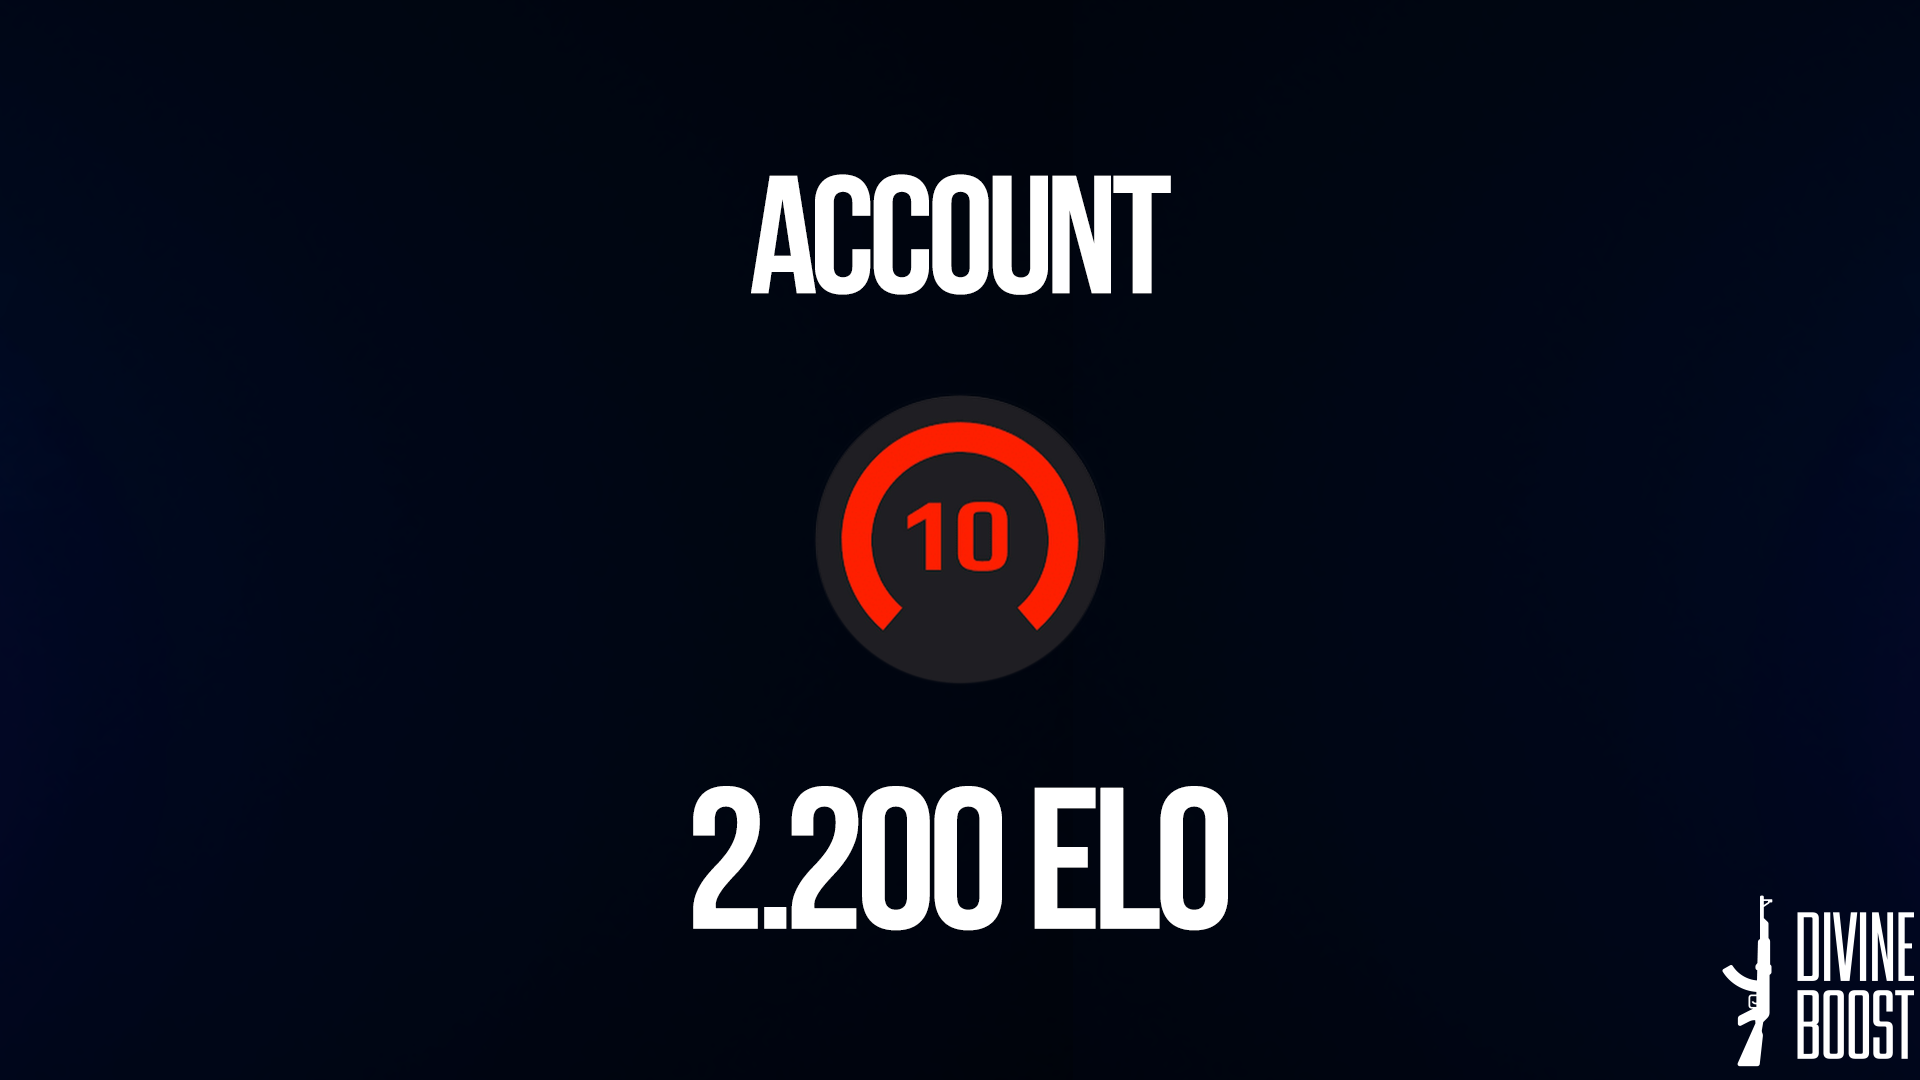 Account Faceit Level 8 + 3 wins (1,770 Elo, 1.6 K/D, 79% Winrate)